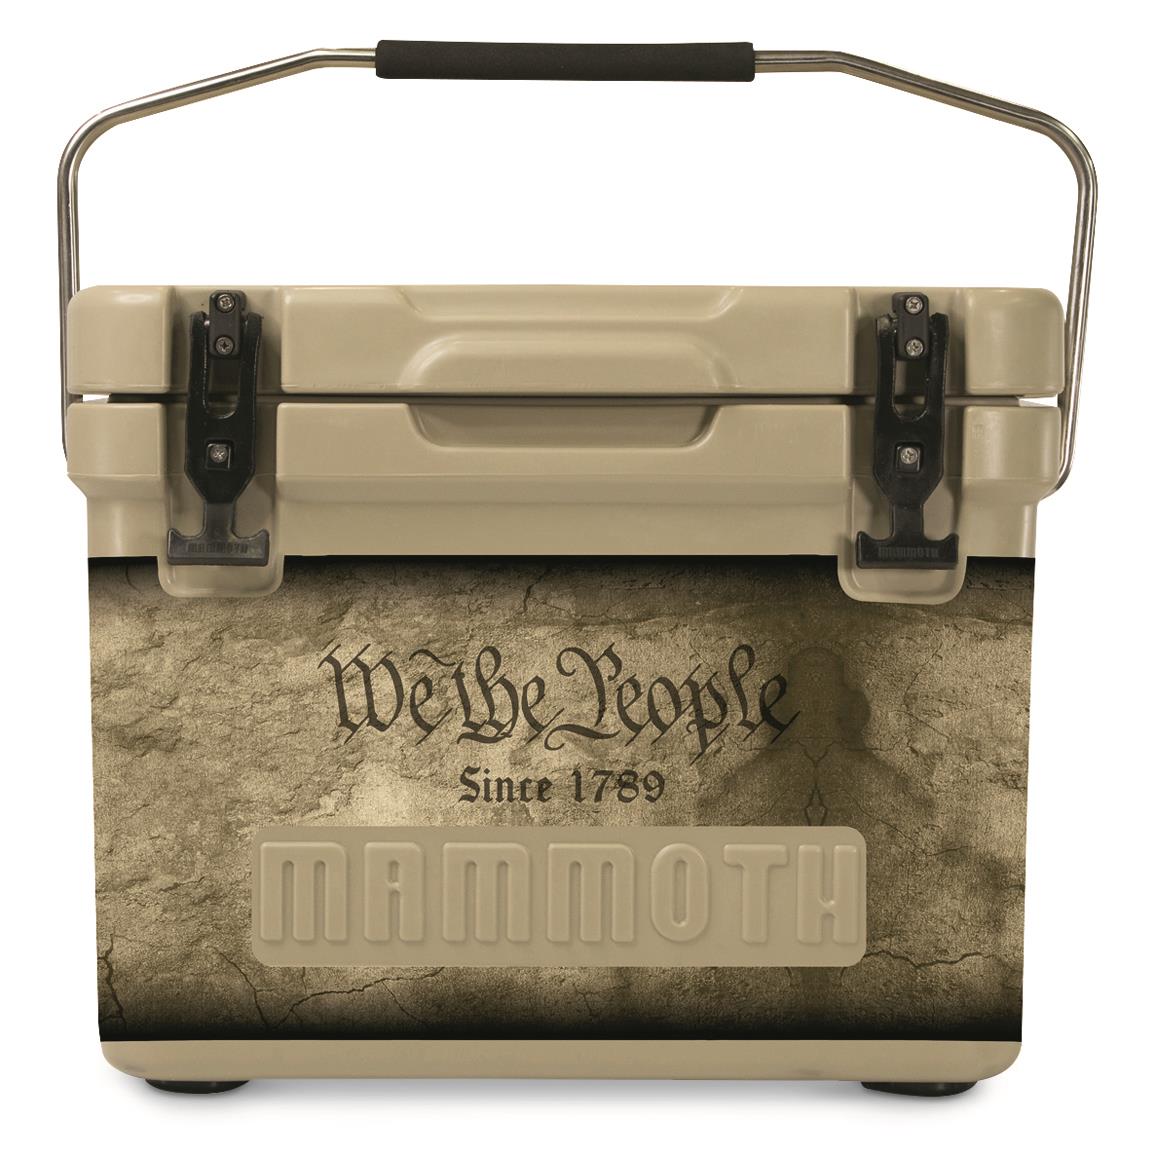 Mammoth Coolers Cruiser 30 Limited-edition 2nd Amendment Cooler